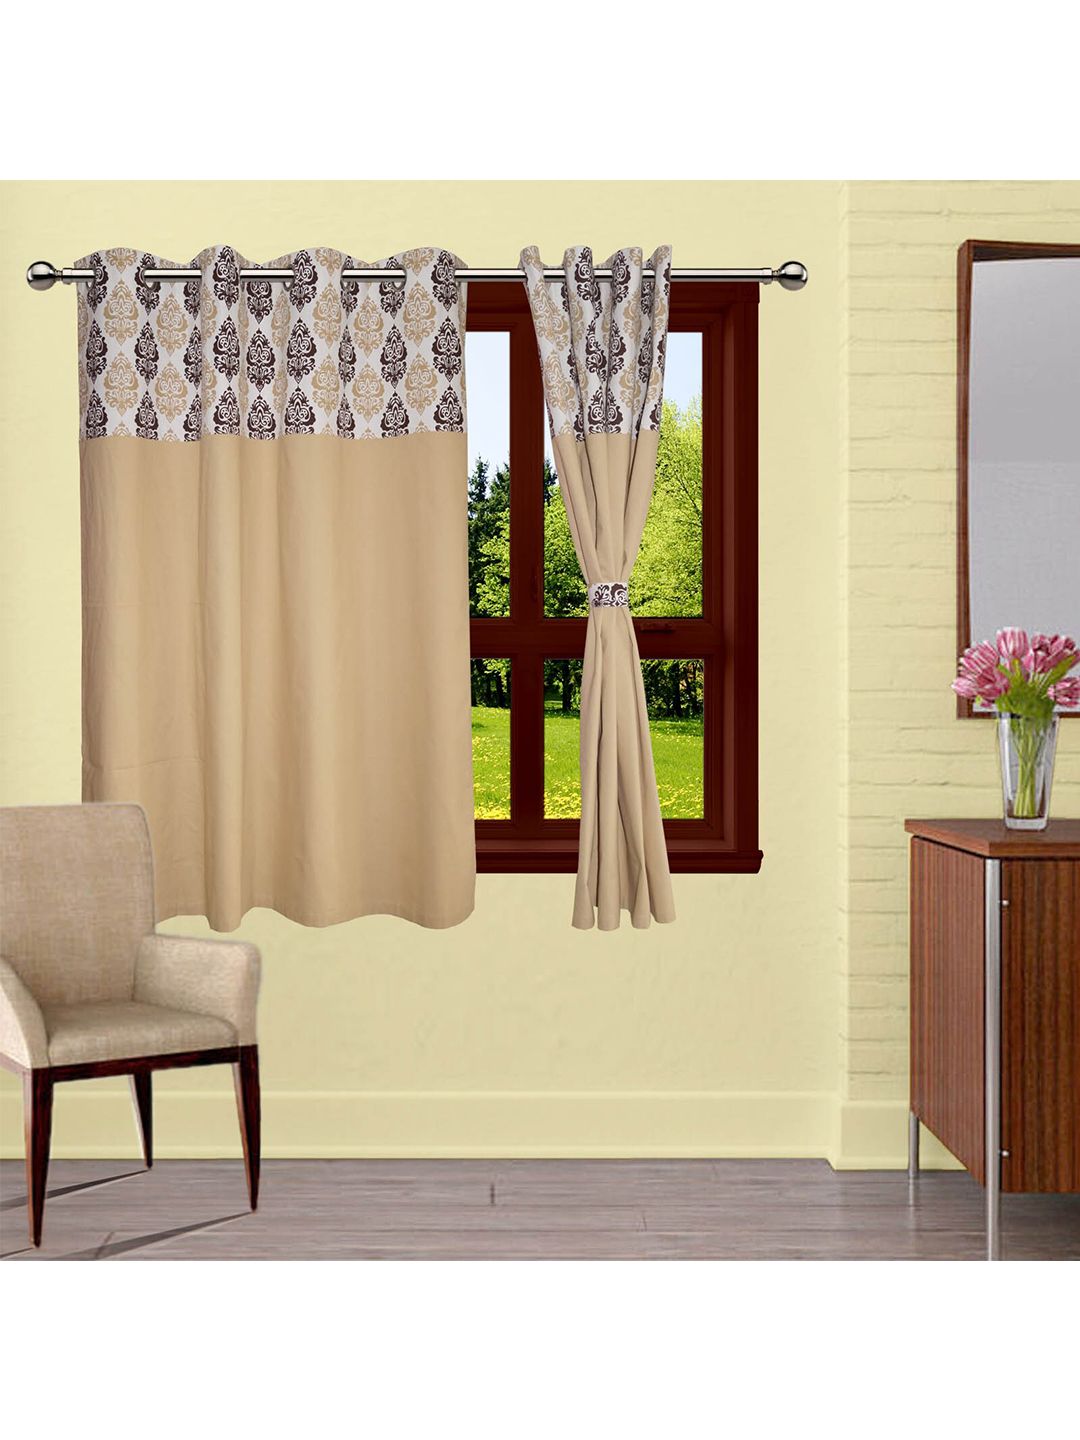 Lushomes Beige & Brown Ethnic Motifs Printed Single Window Cotton Curtain Price in India